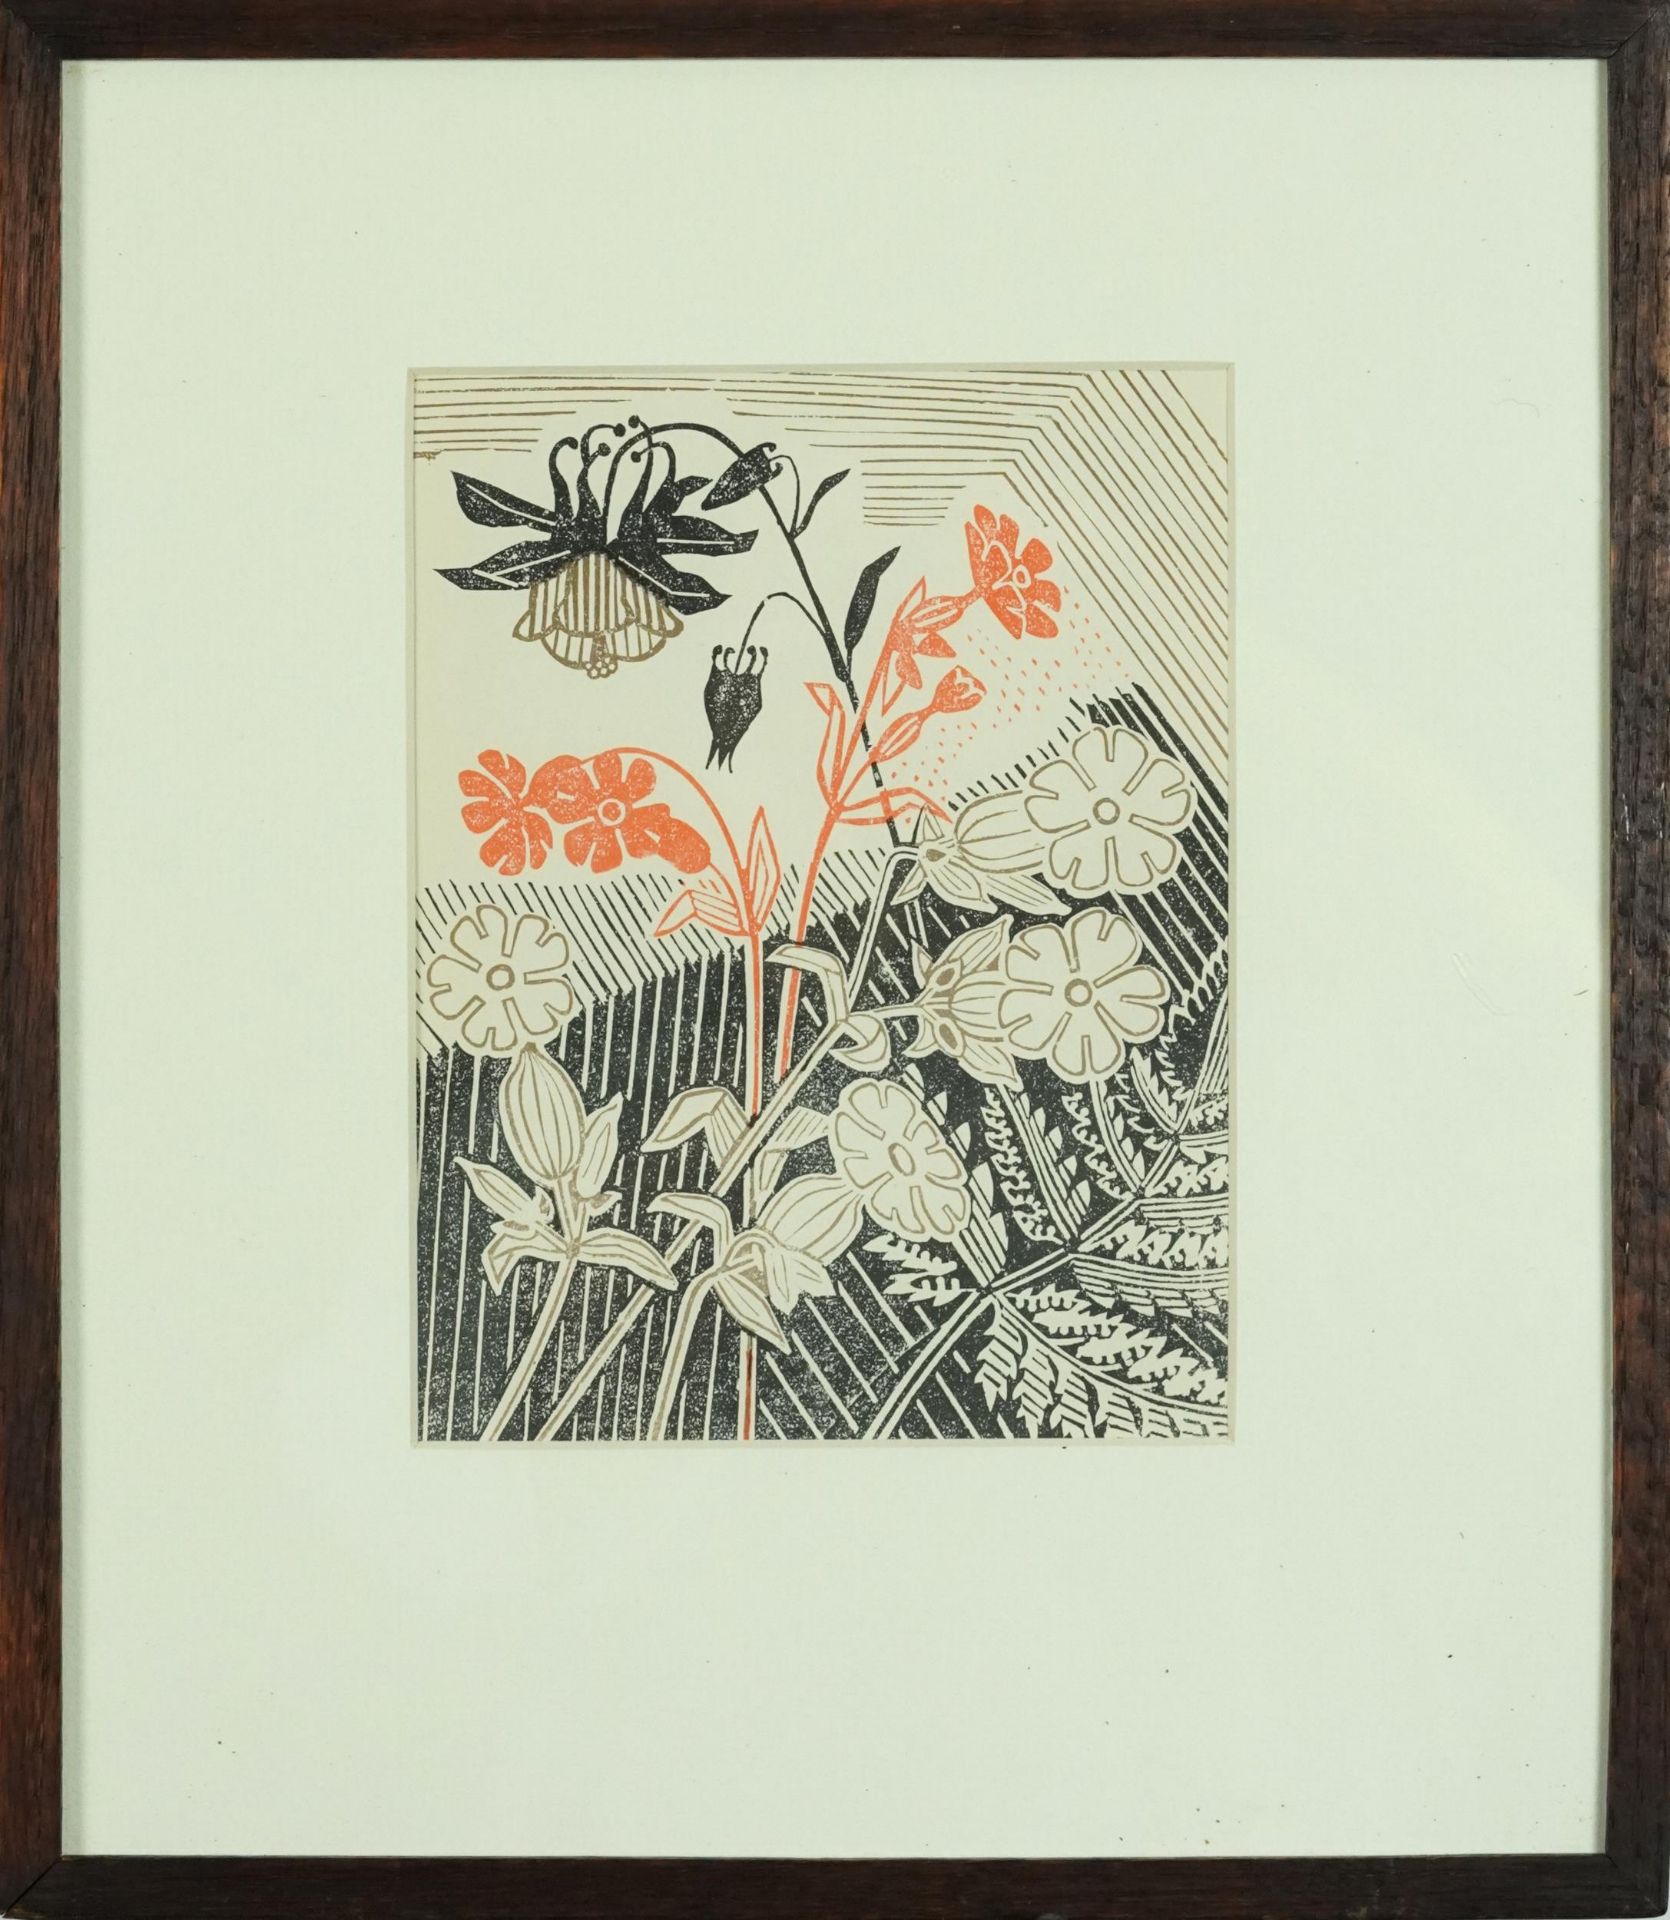 Edward Bawden - Campions and Columbine, linocut inscribed Signature 1947 Curwen Press verso, - Image 2 of 4